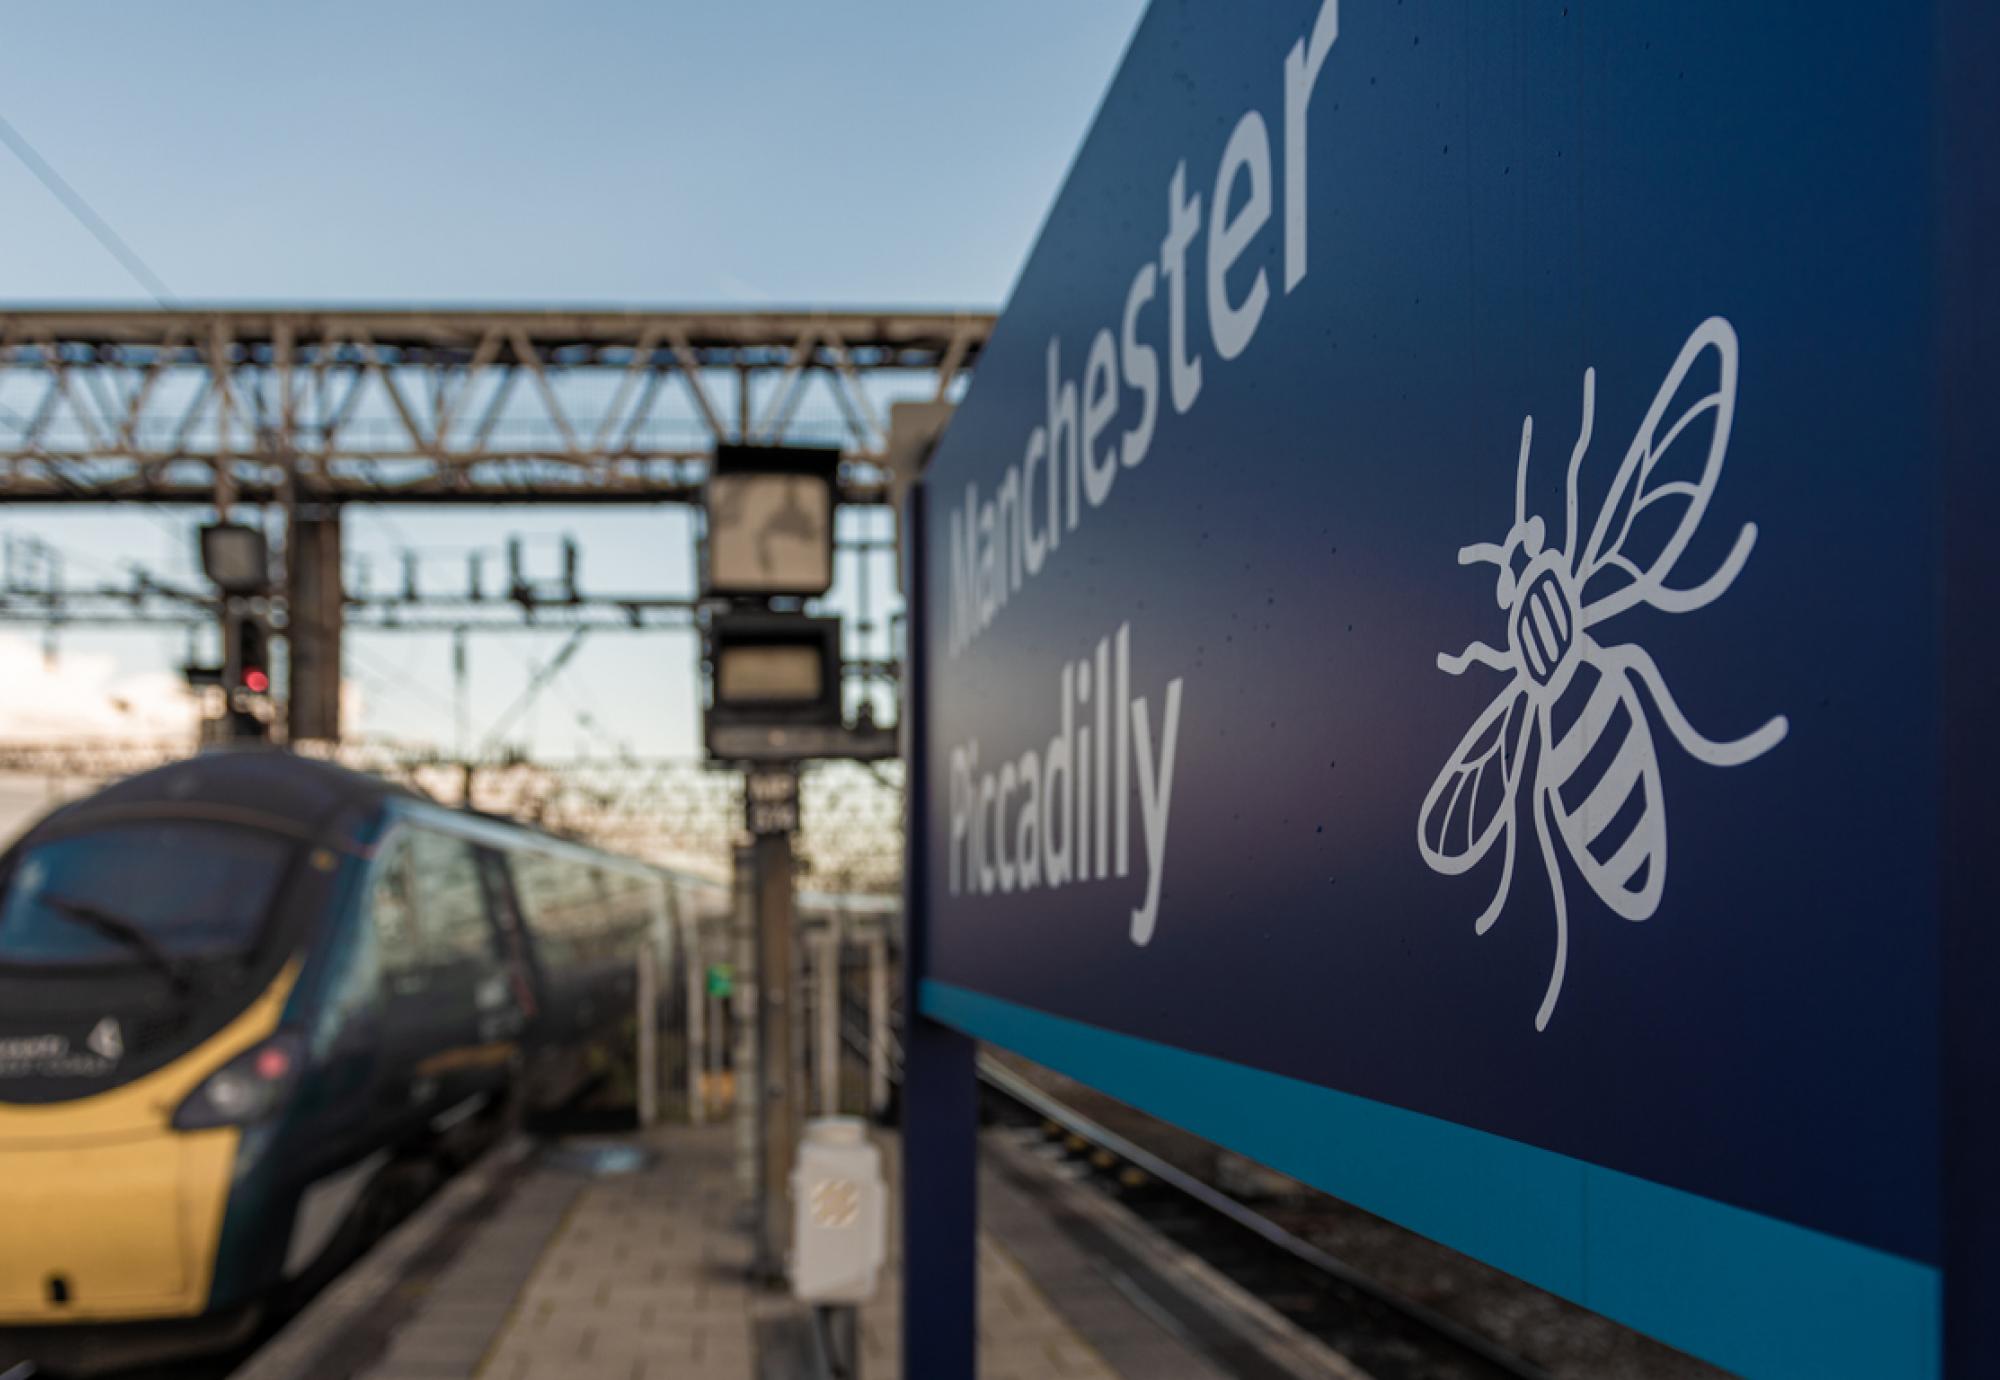 Rail North committee set out new objectives for transport in the region at committee meeting